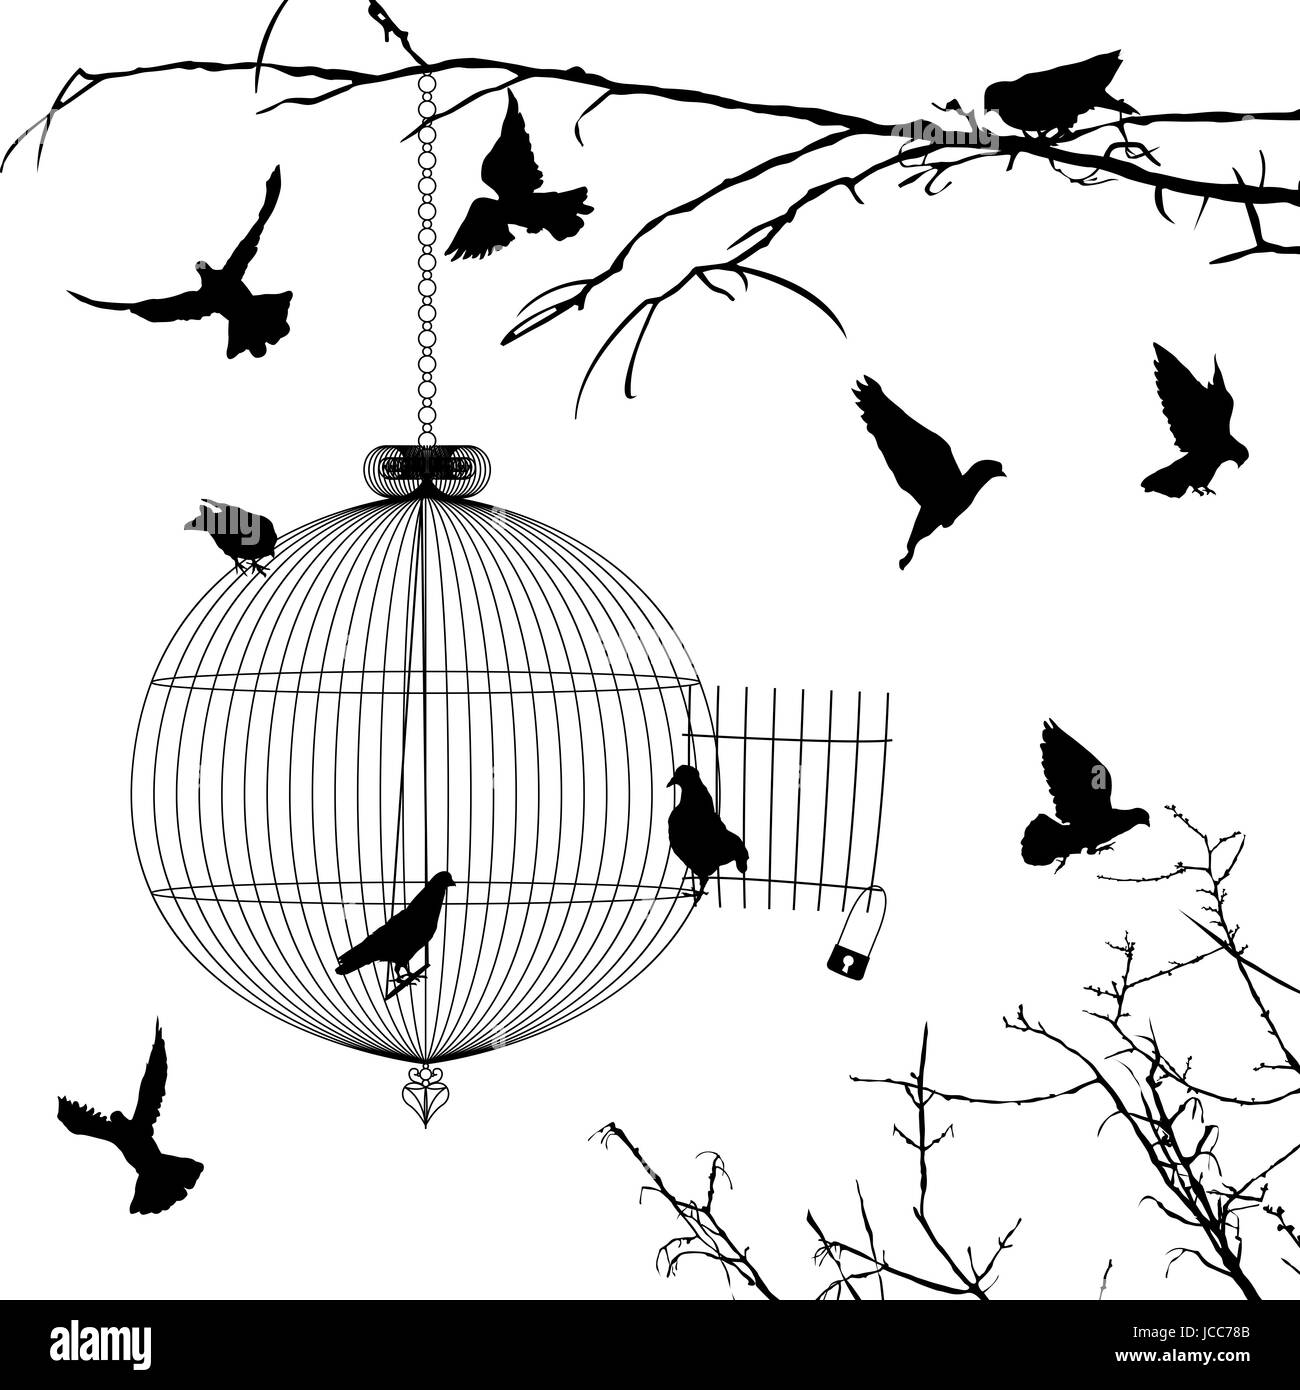 Cage and birds silhouettes over white background Stock Photo